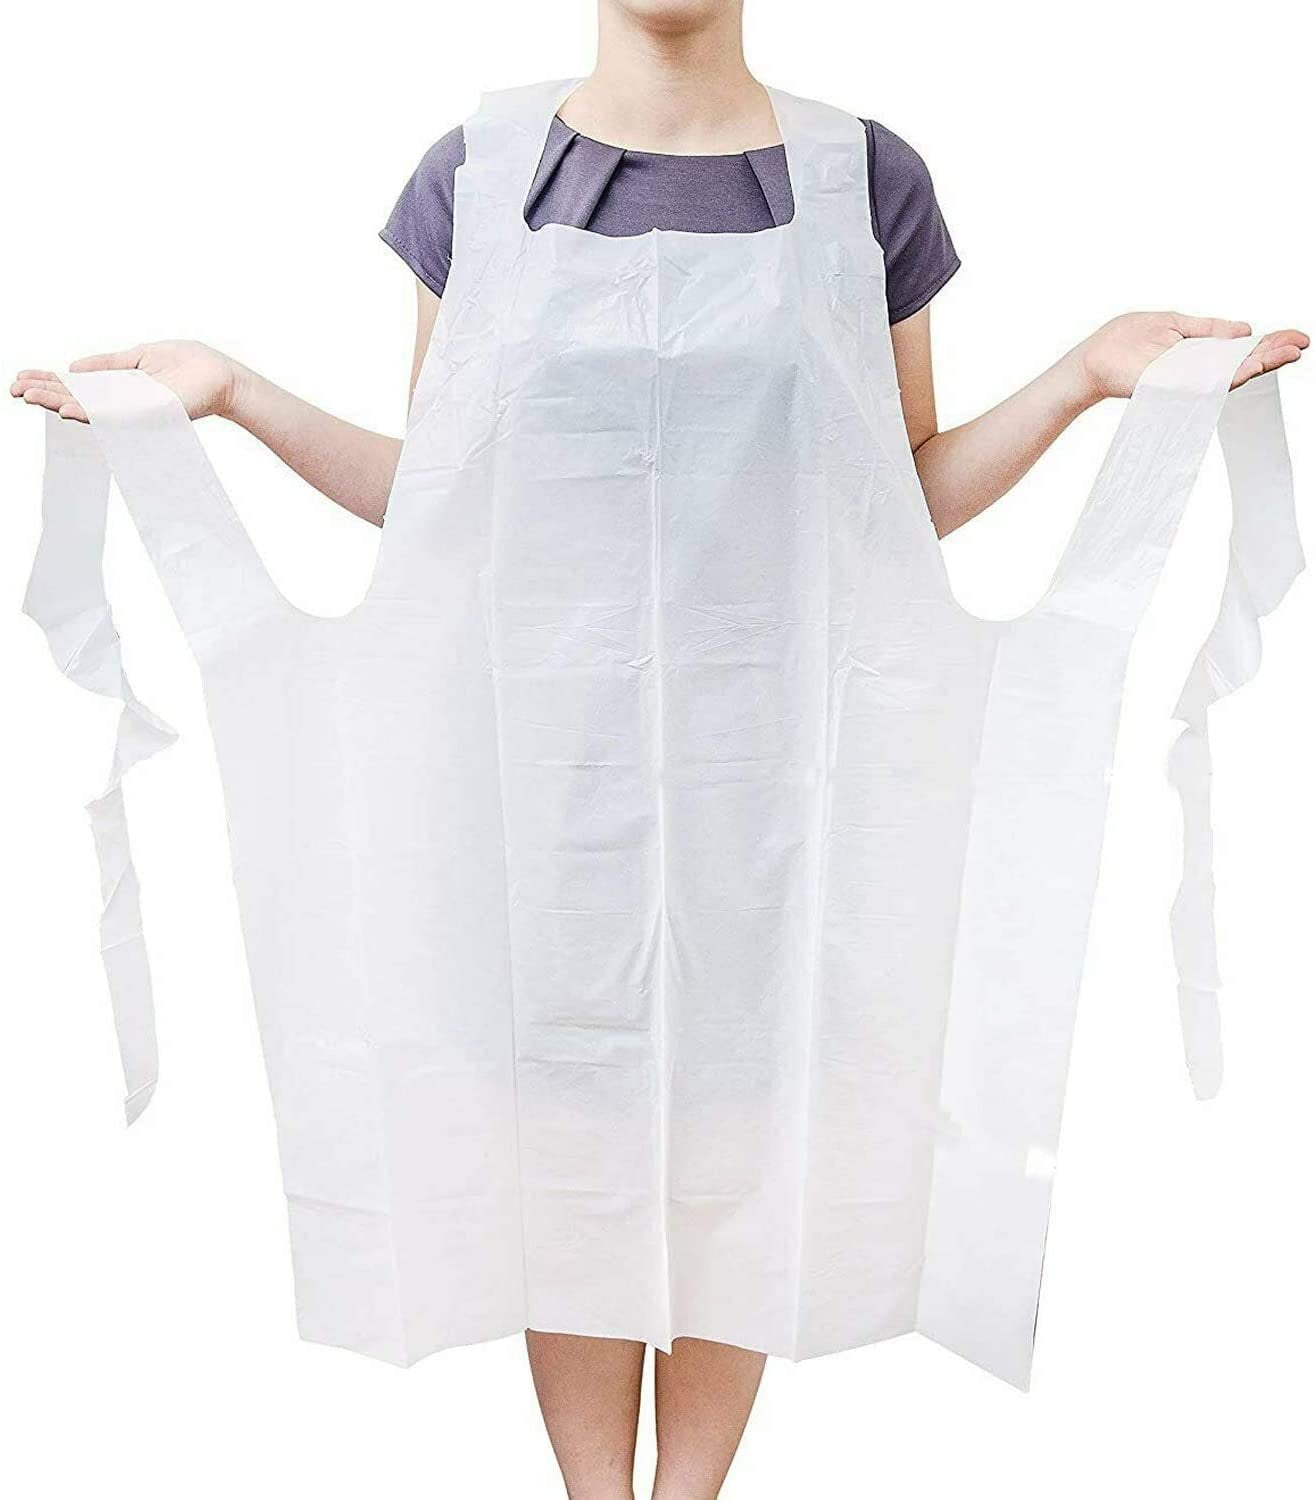 100 White Plastic Aprons Disposable Aprons Strong Polythene 